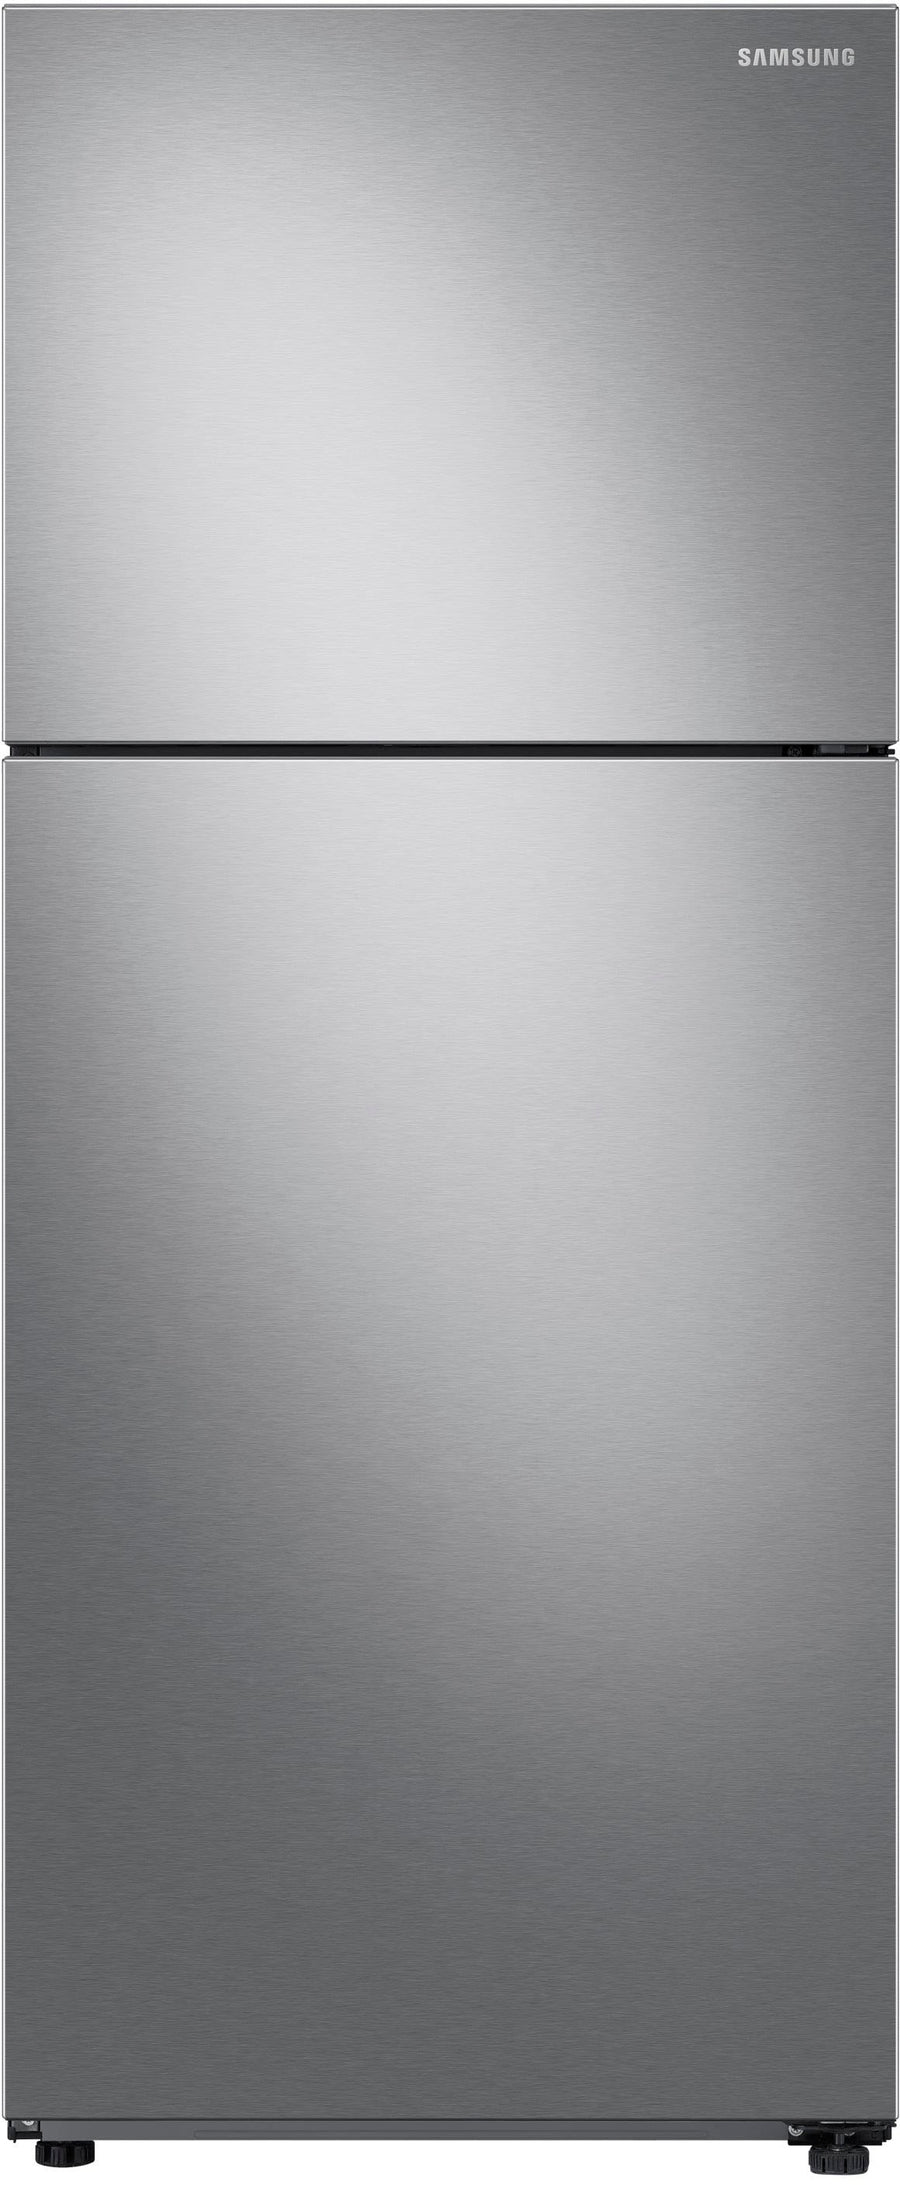 Samsung - 15.6 cu. ft. Top Freezer Refrigerator with All-Around Cooling - Stainless steel_0